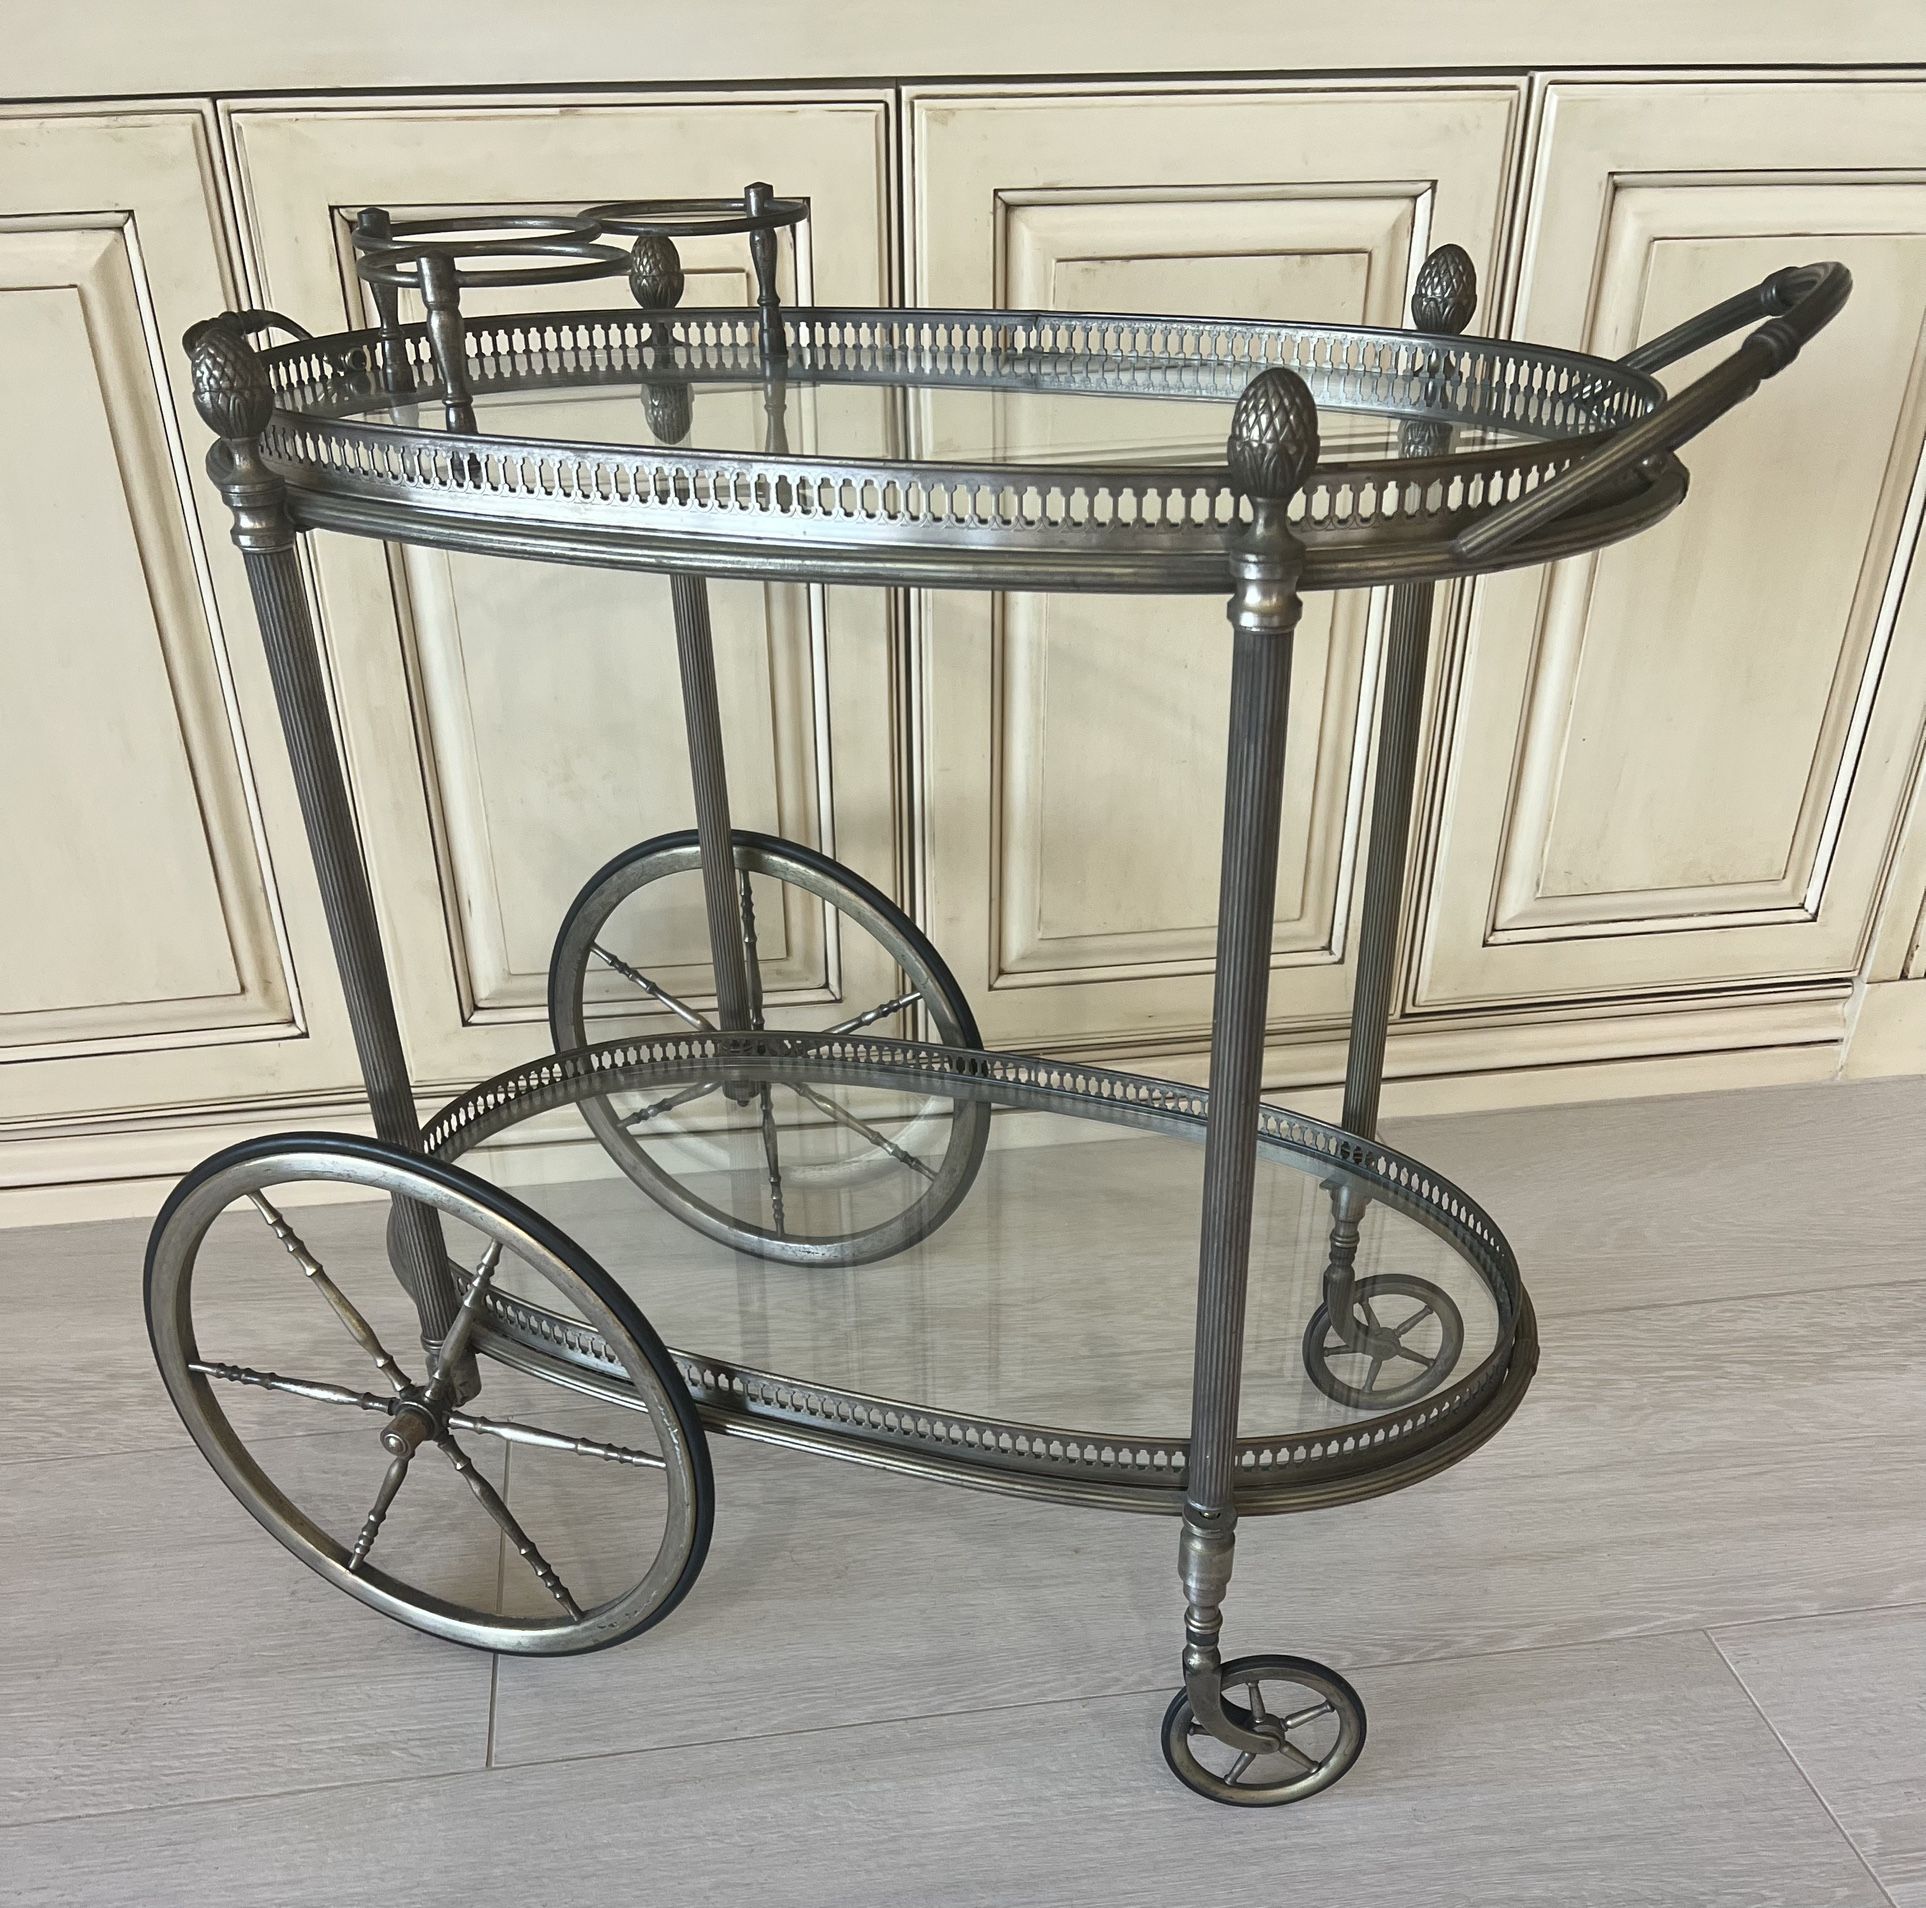 Bar Cart In Glass And Metal with 3 Rings For Wine Bottles. Has 4 Wheels And Is In Perfect Condition.  